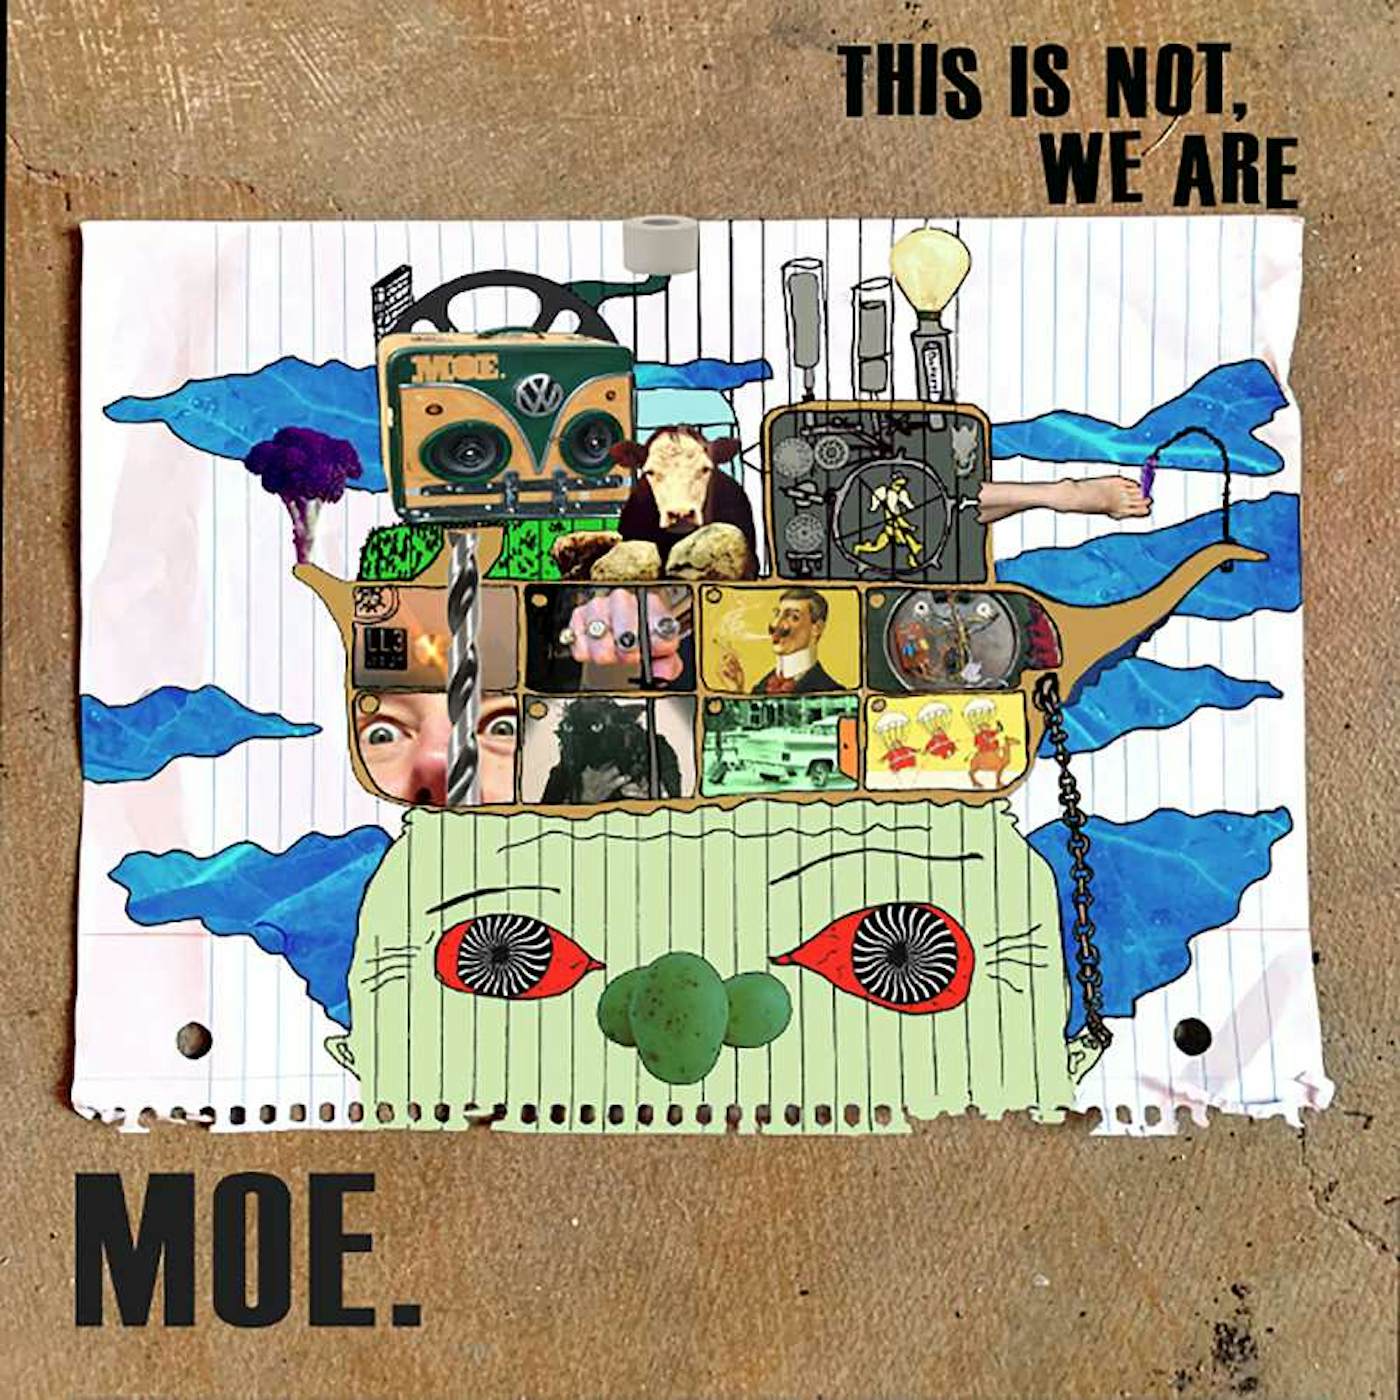 moe. THIS IS NOT, WE ARE (BLUE GALAXY VINYL) Vinyl Record